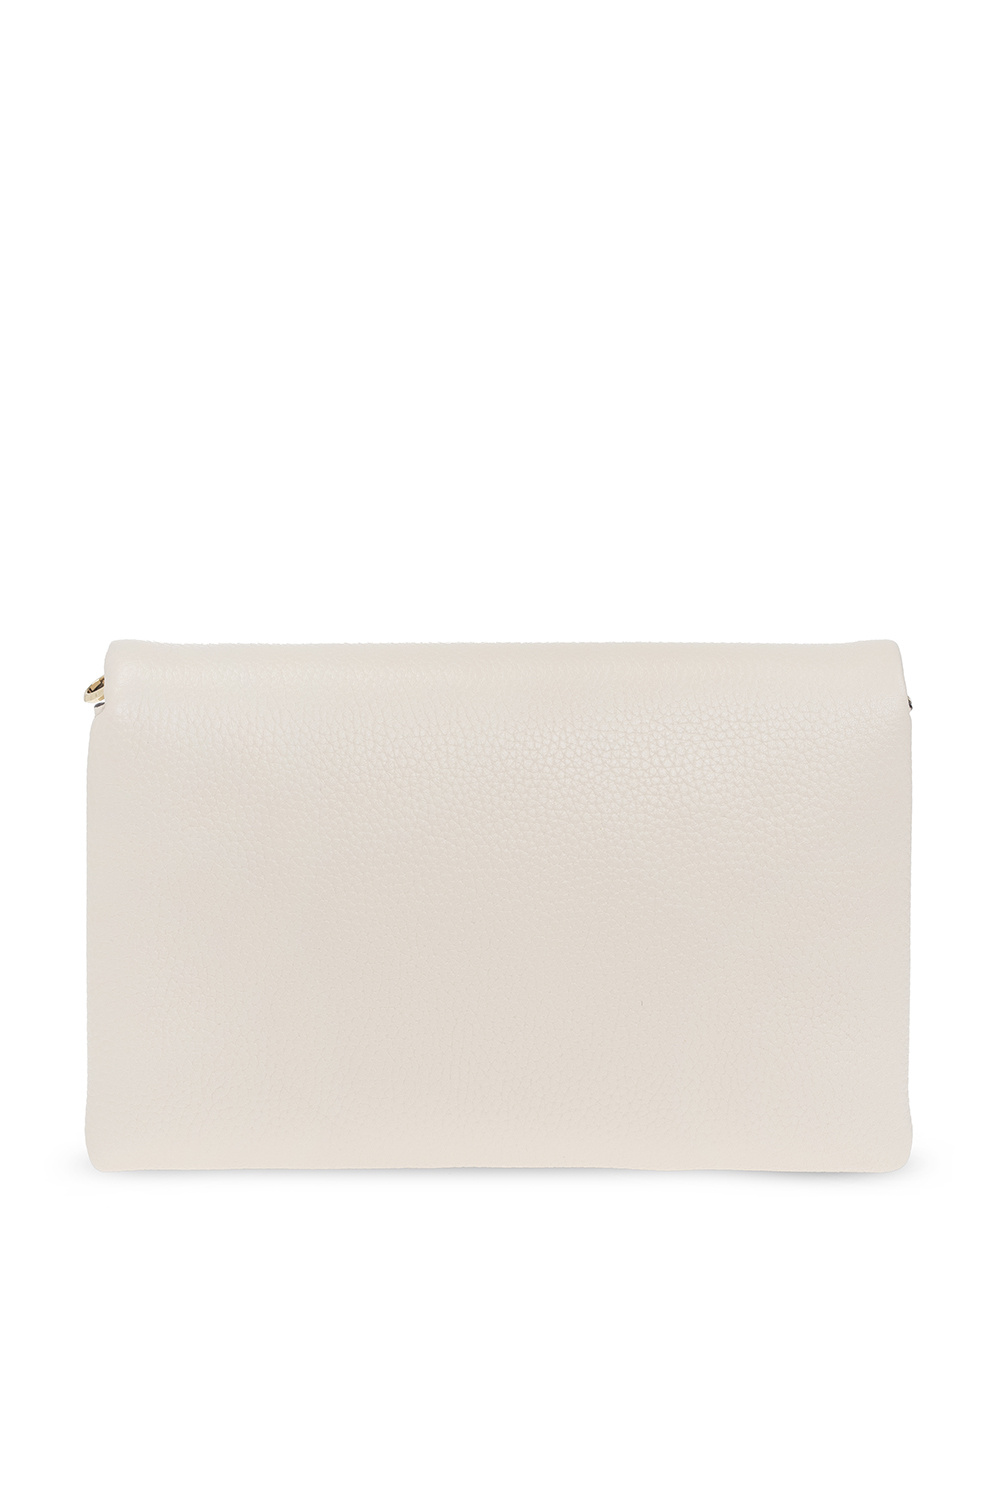 Kate Spade ‘Carlyle’ wallet with strap